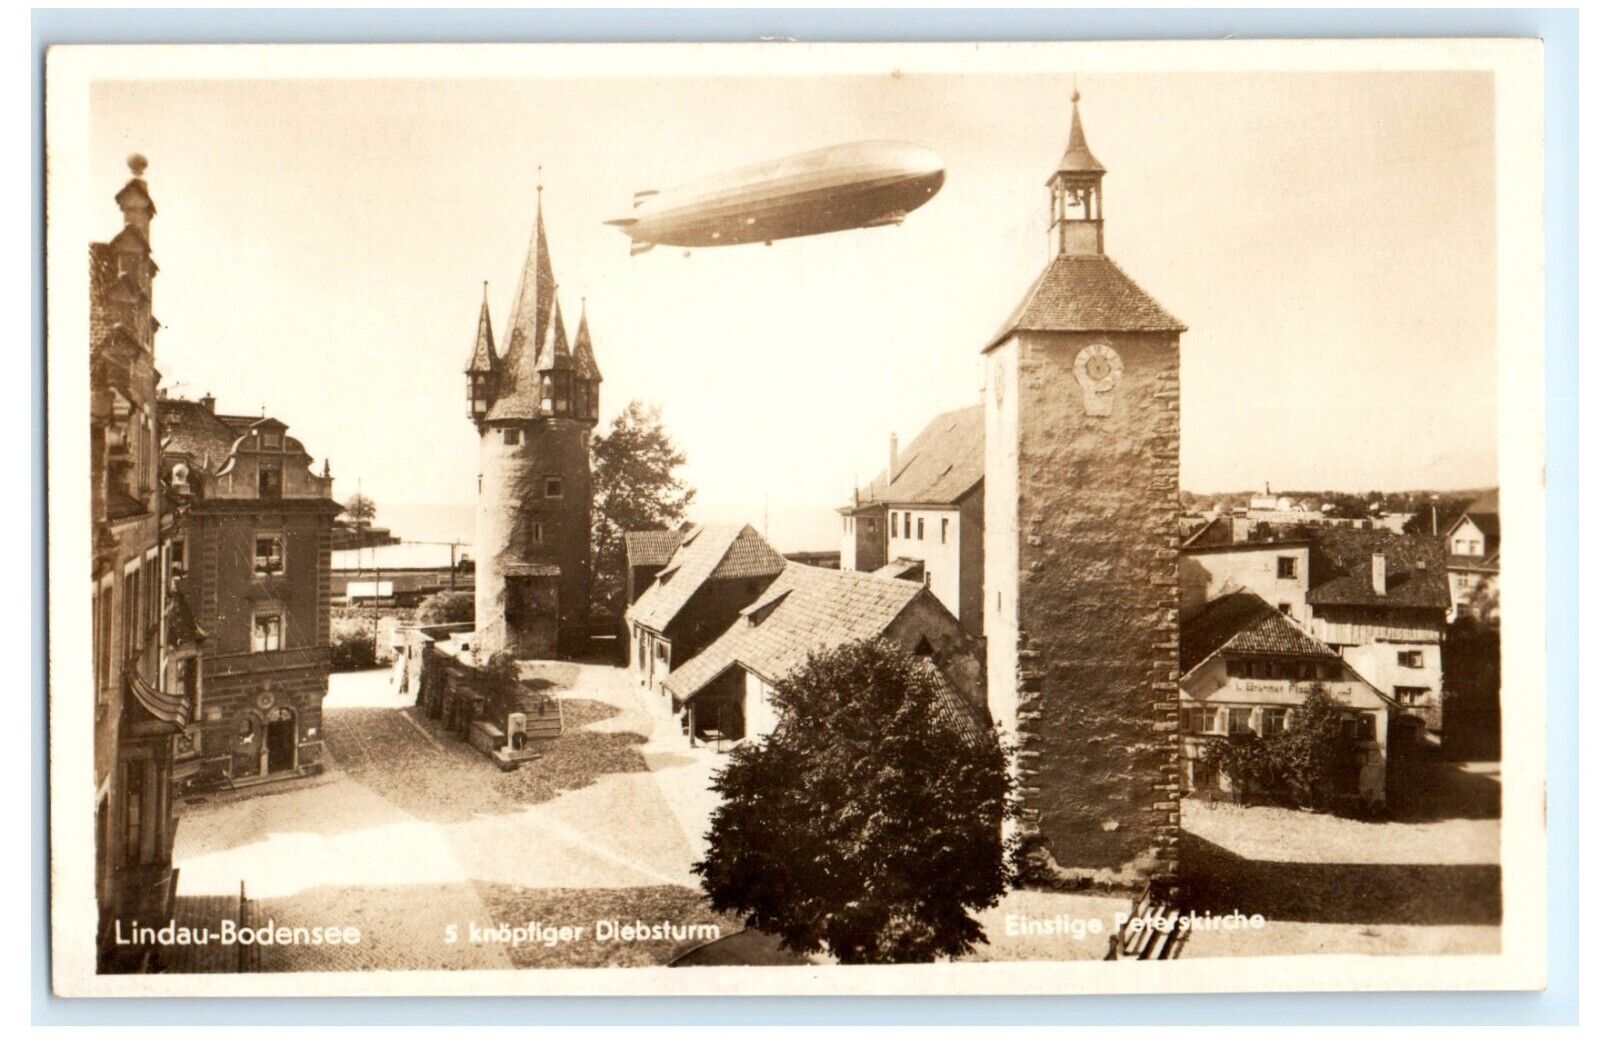 Zeppelin Over Lindau Bodensee Germany Real Photo RPPC Postcard (FQ8)